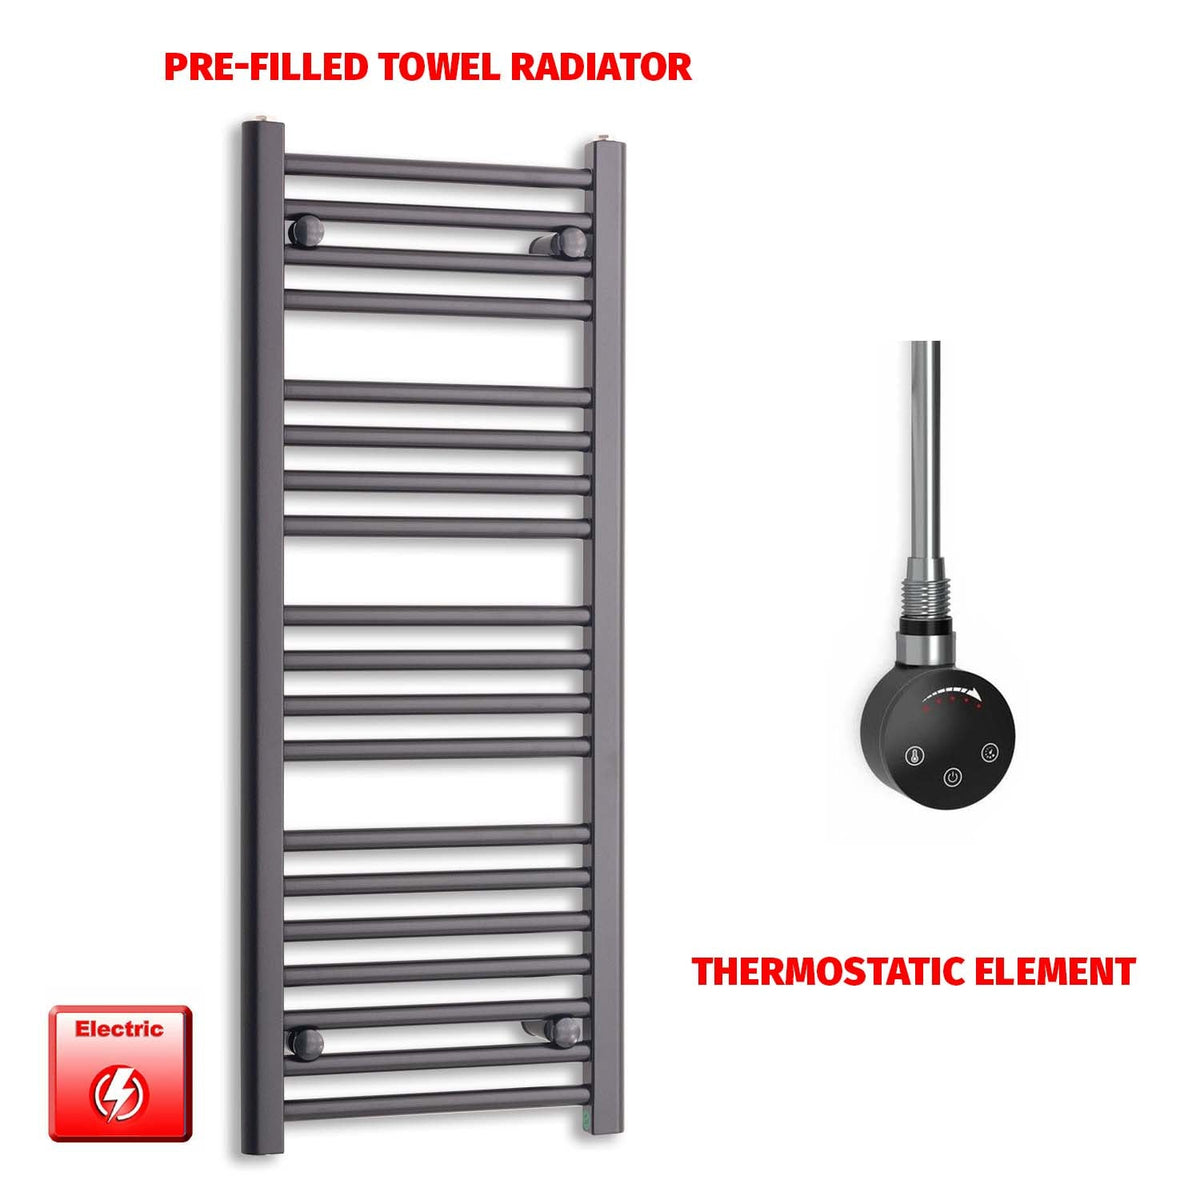 1000mm High 450mm Wide High Flat Black Pre-Filled Electric Heated Towel Radiator HTR SMART Thermostatic